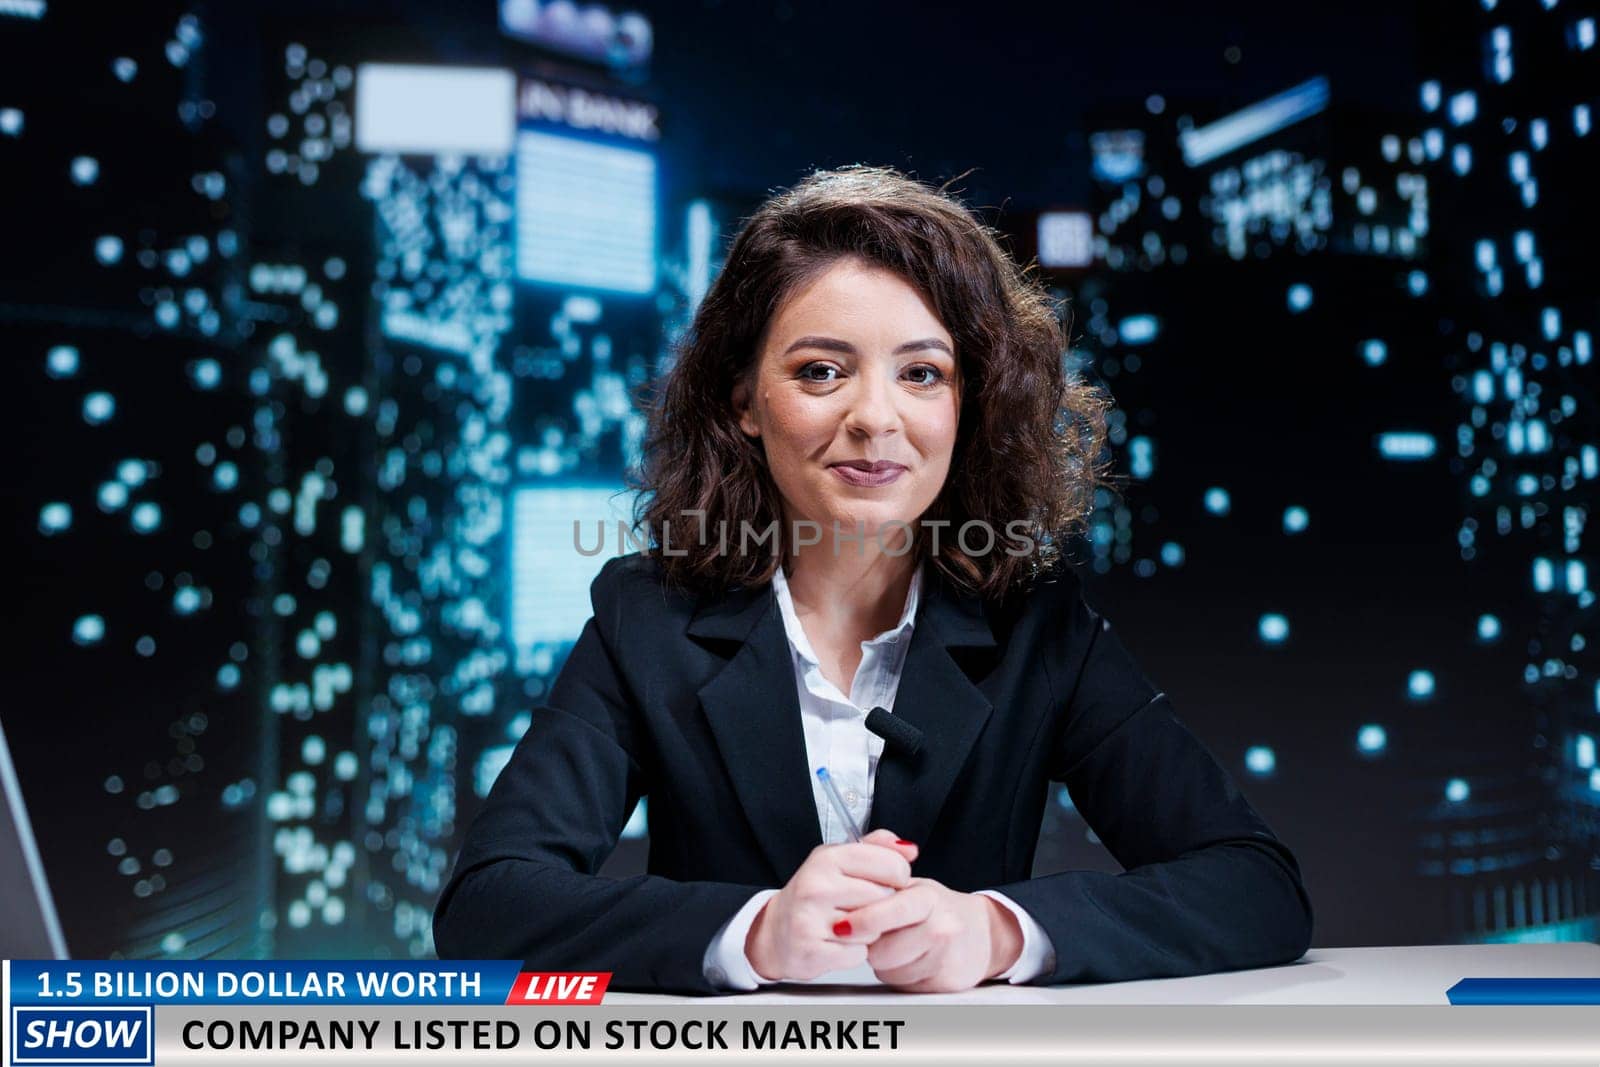 News program about billions dollars company sold on stock market, business value worth a lot of money. Woman journalist on late talk show discussing economics sector, live broadcast.